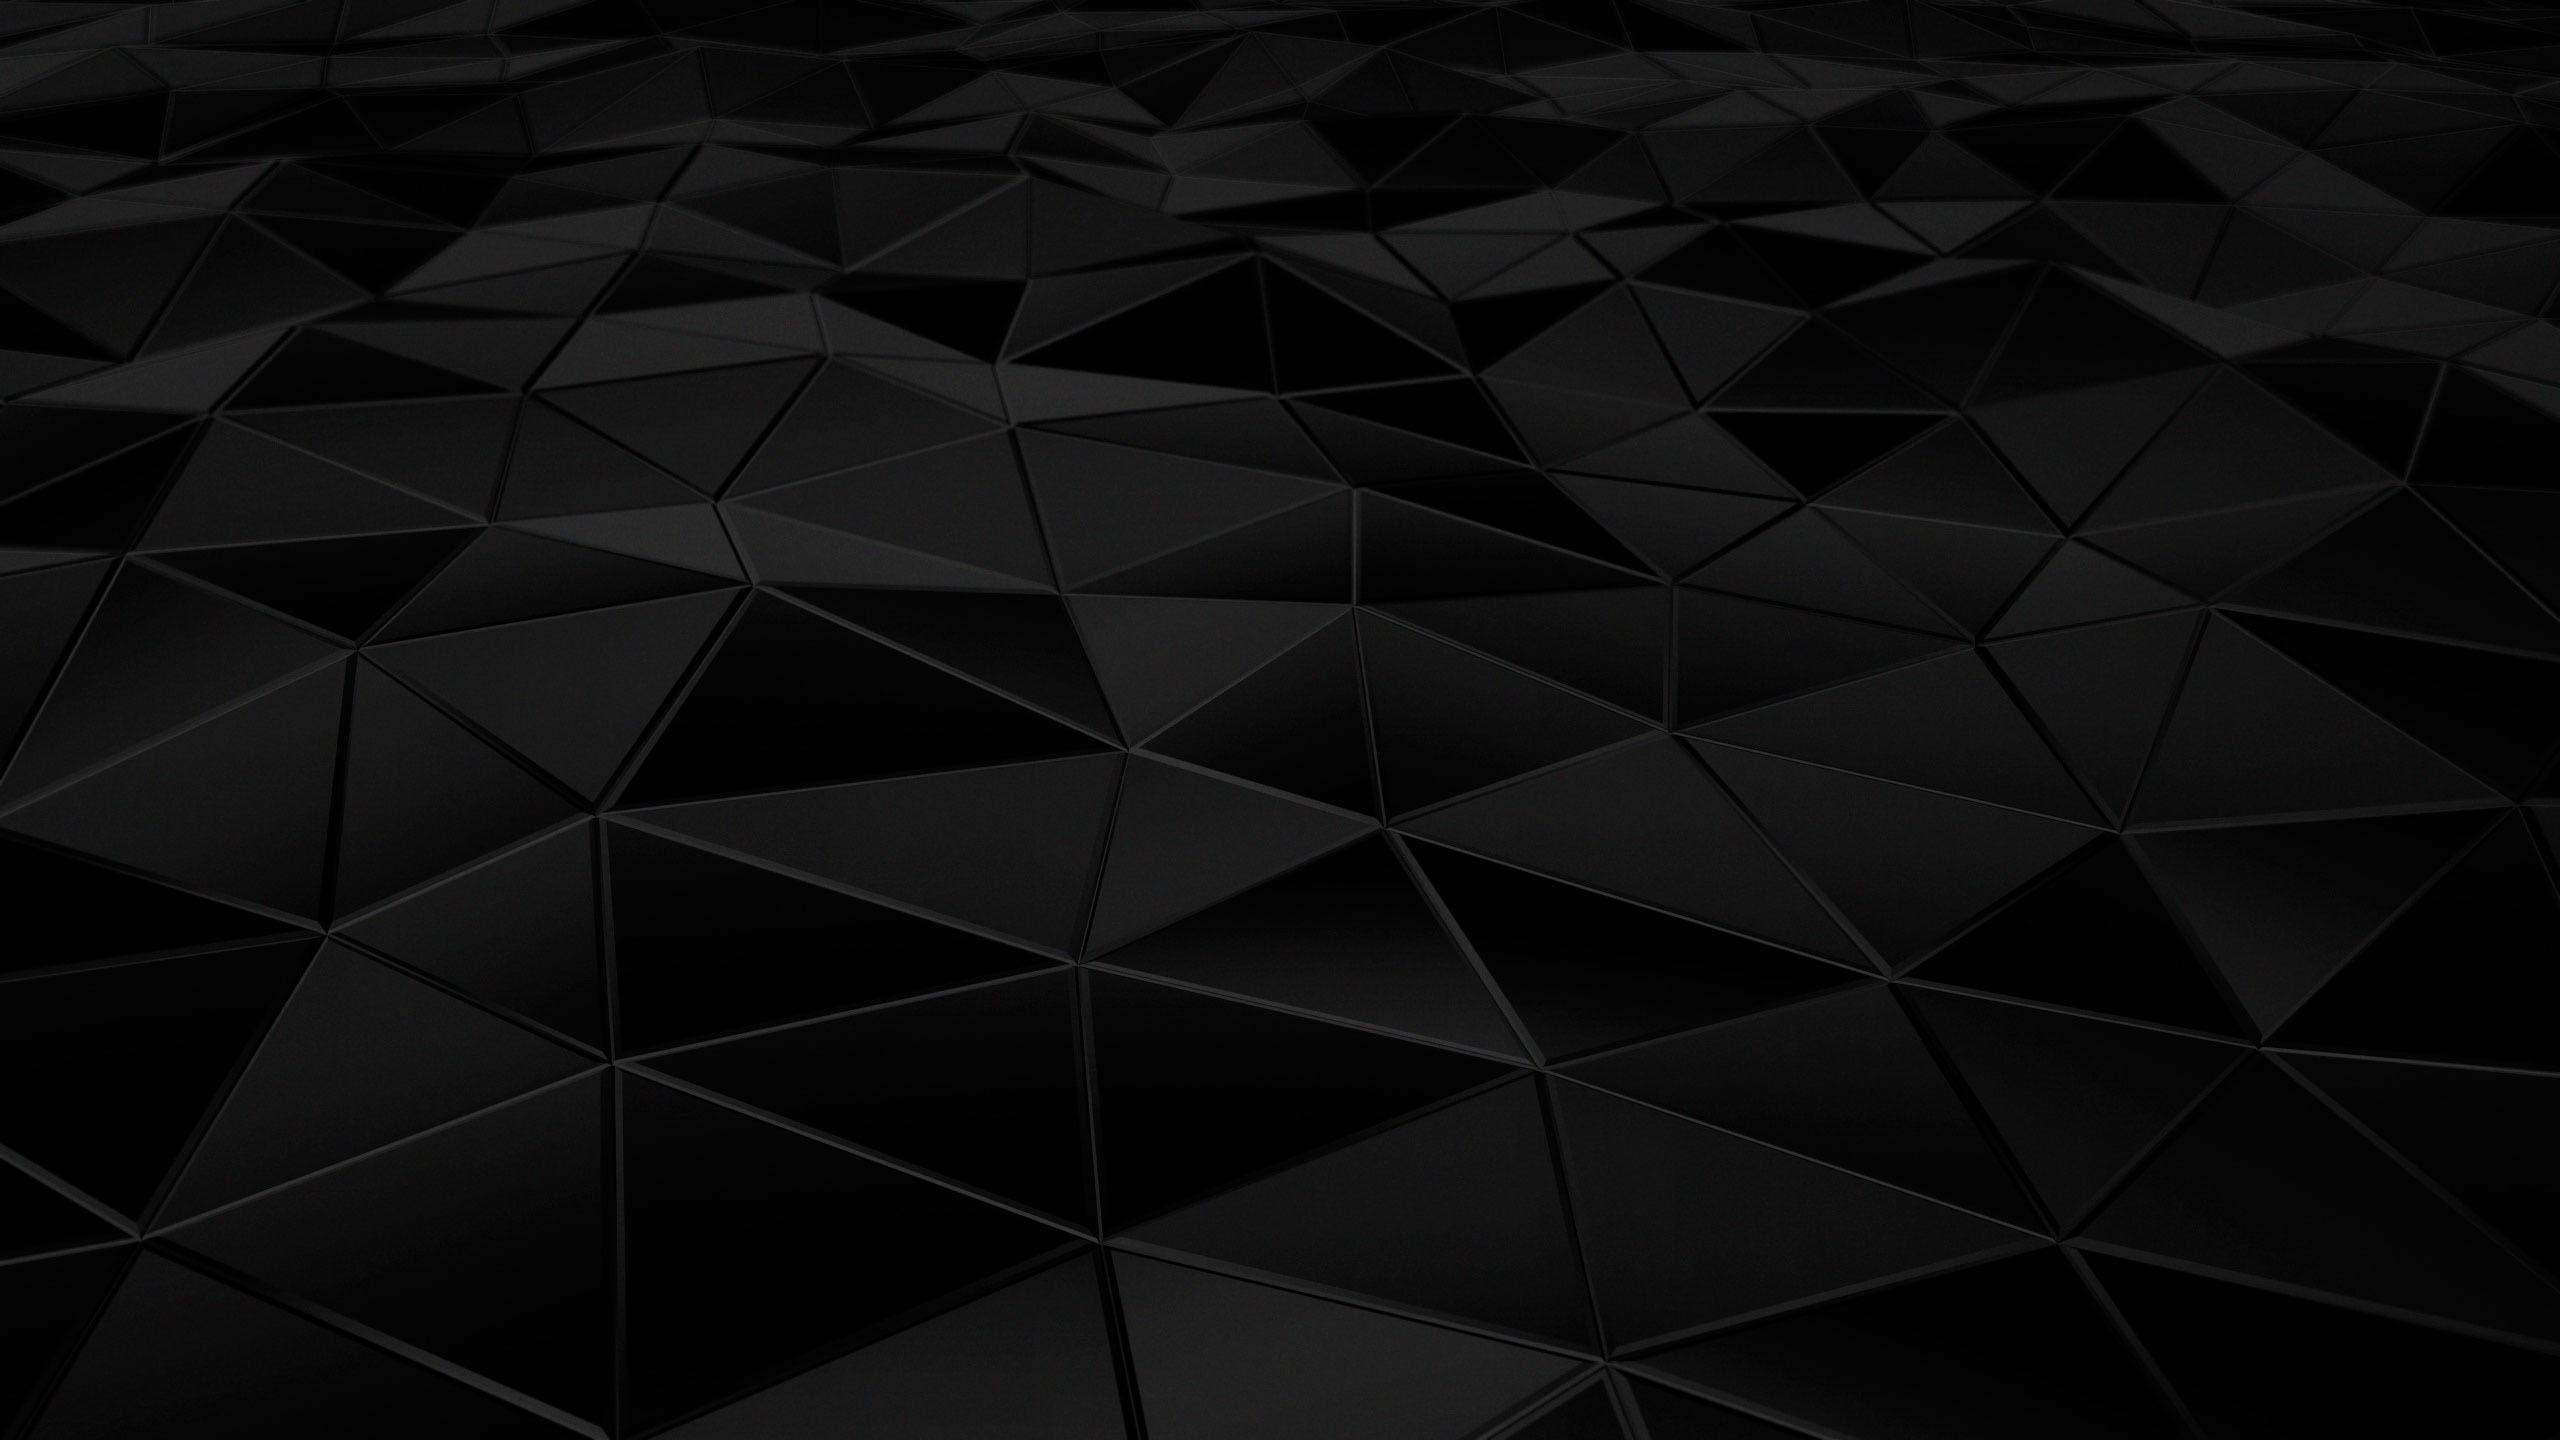 30 Black abstract Wallpapers HD Download 2560x1440